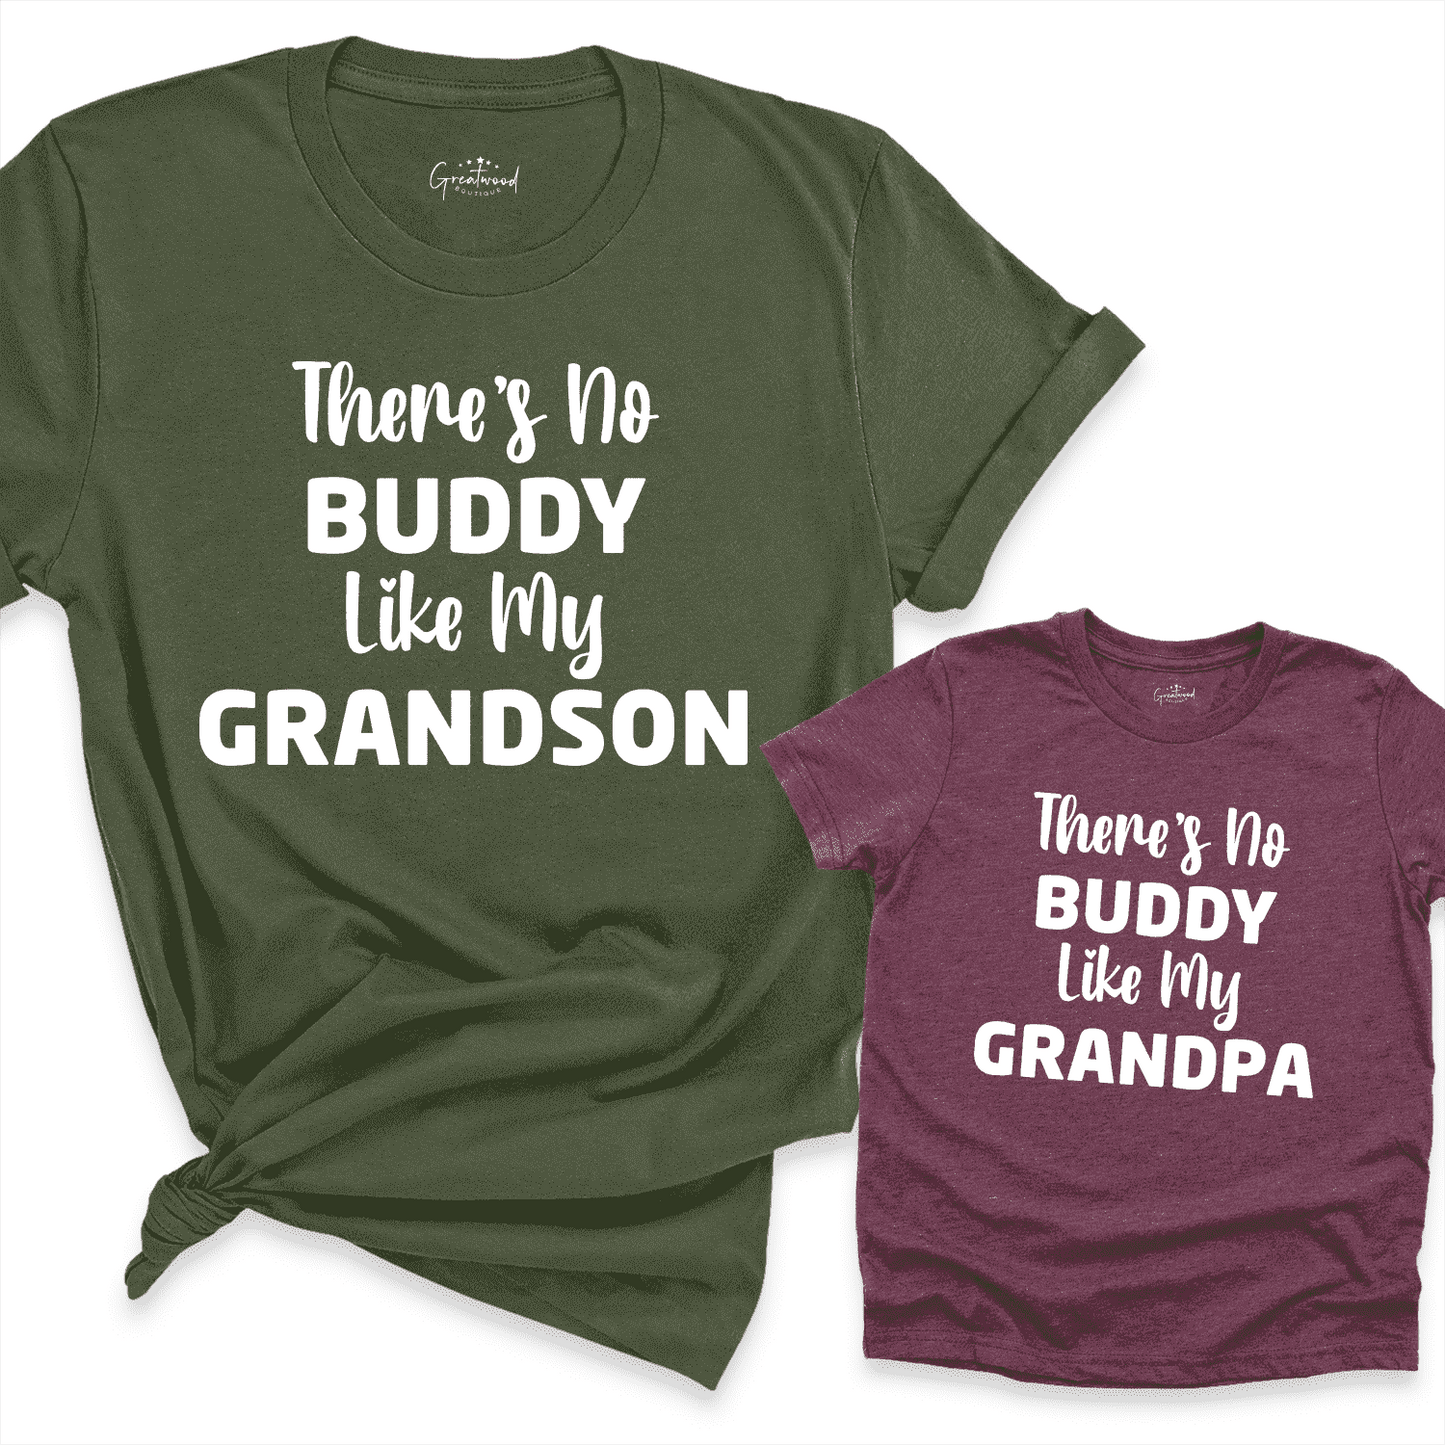 There's No Buddy Like My Grandson Shirt Green - Greatwood Boutique